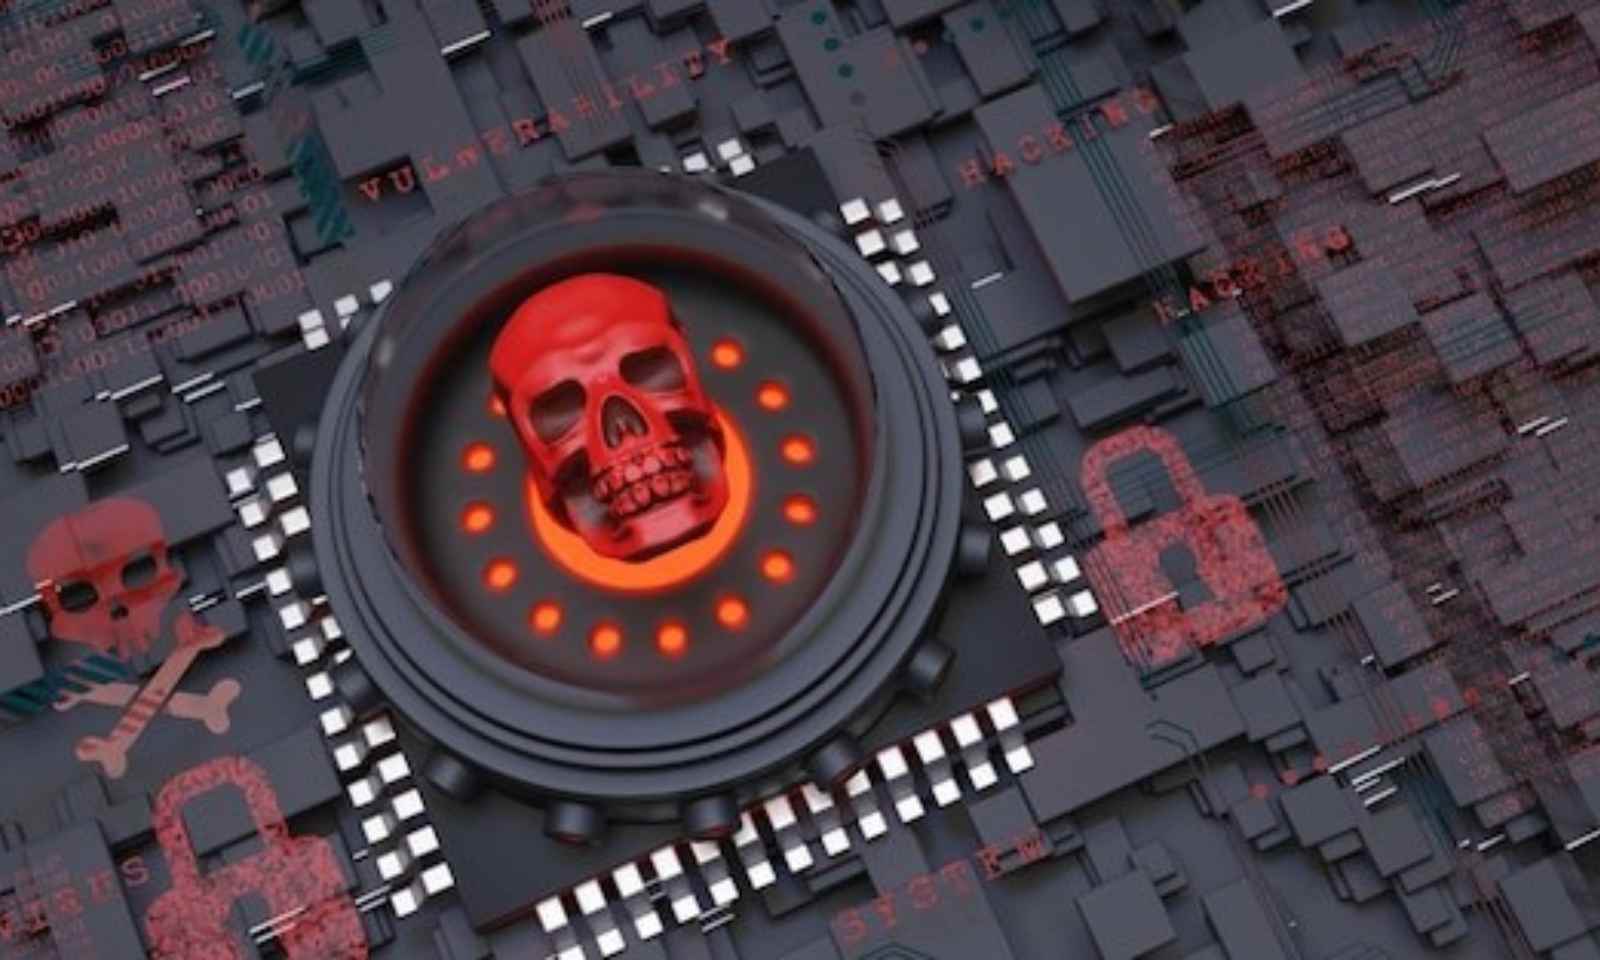 Cybercriminals' New Weapon: FraudGPT AI Poses Grave Threats to Online Security